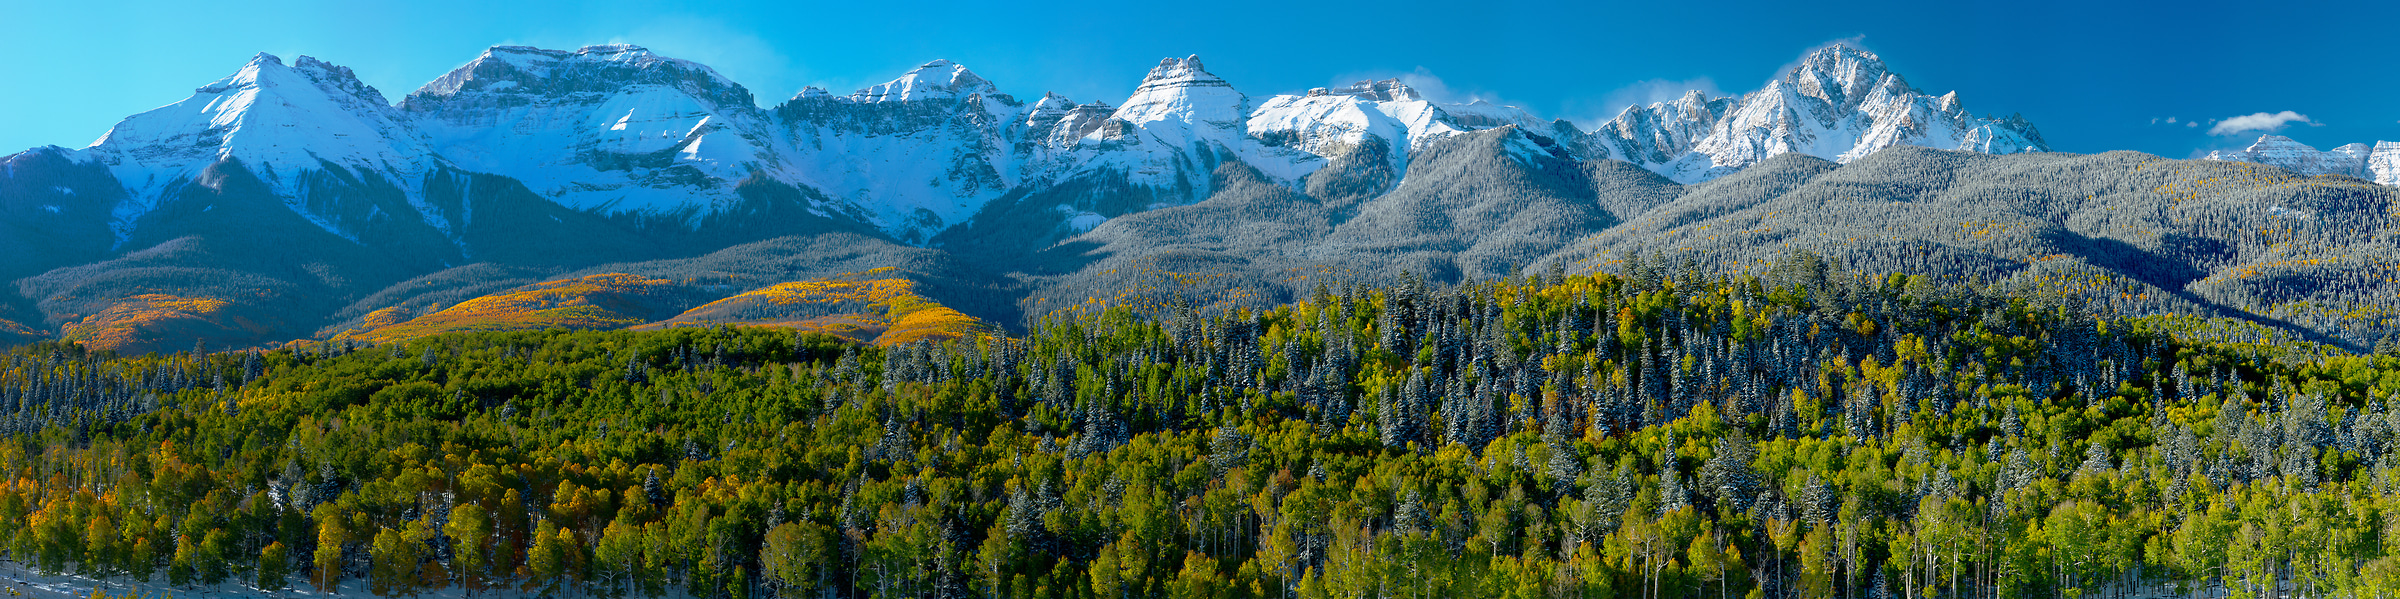 1,152 megapixels! A very high resolution, large-format VAST photo print of a snow-covered mountain range with forests in the foreground; landscape photograph created by John Freeman in Mt. Sneffles, Ridgway, Colorado